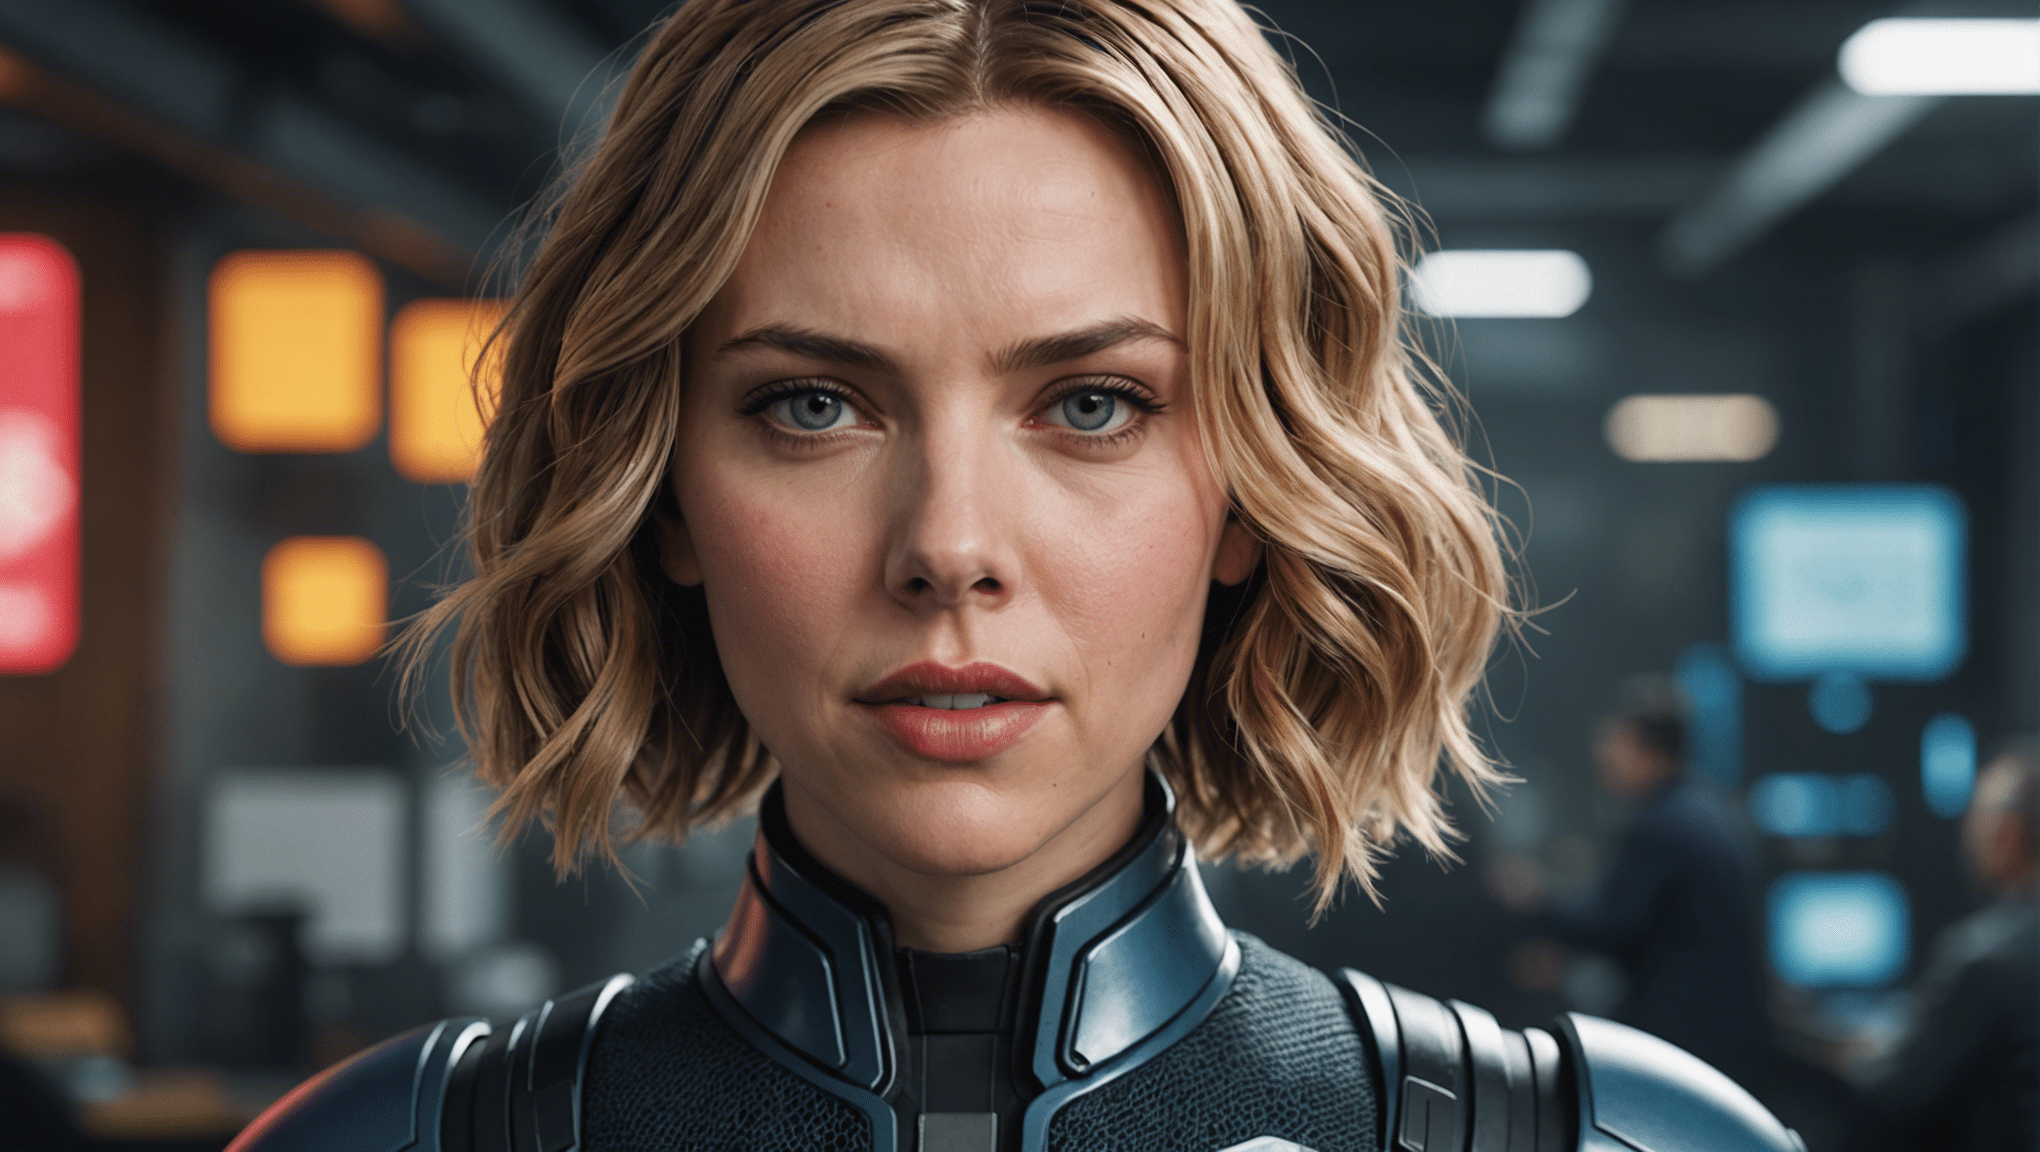 discover the shocking truth about openai's chatgpt voice and its resemblance to scarlett johansson. learn more about this fascinating comparison and what it reveals!